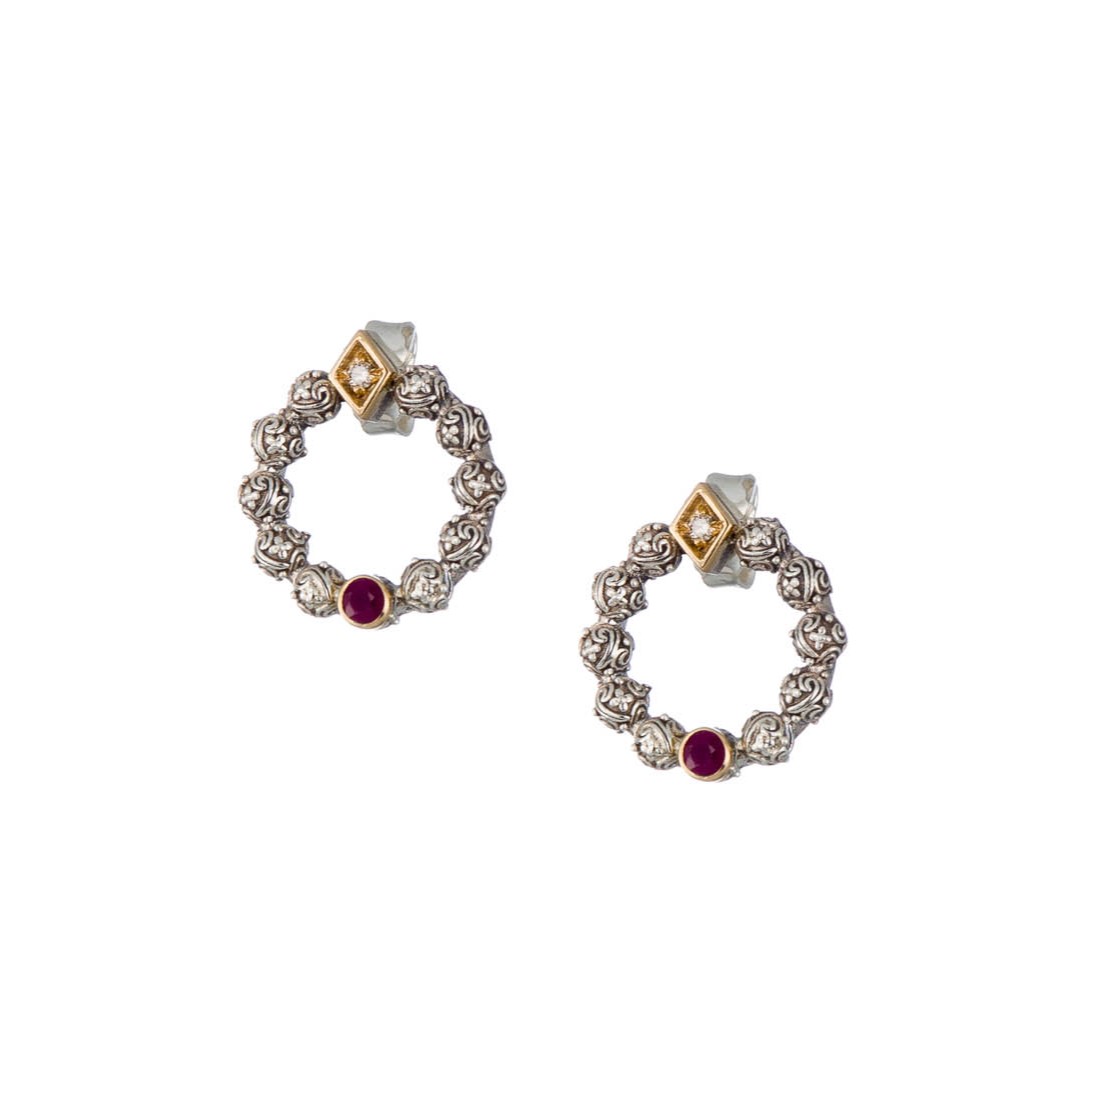 Eve stud cycle earrings in 18K Gold and sterling silver with Gemstones